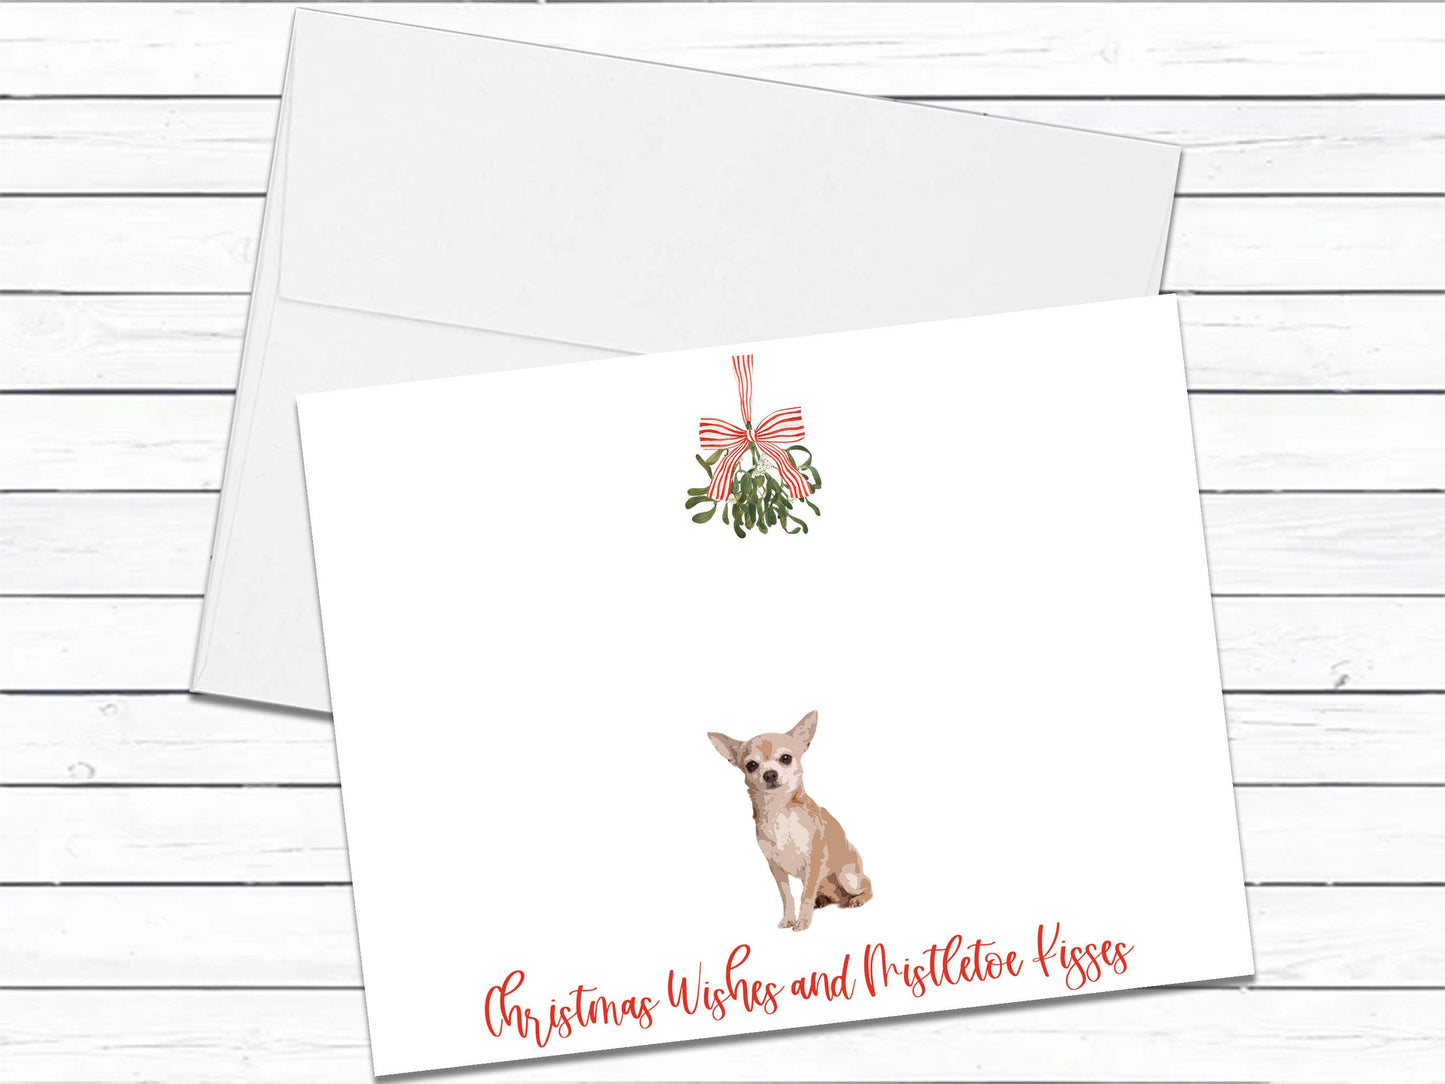 Chihuahua Art, Christmas Card, Christmas Wishes and Mistletoe Kisses, Chihuahua Dog Greeting Cards, Holiday Card, Blank Cards With Envelopes